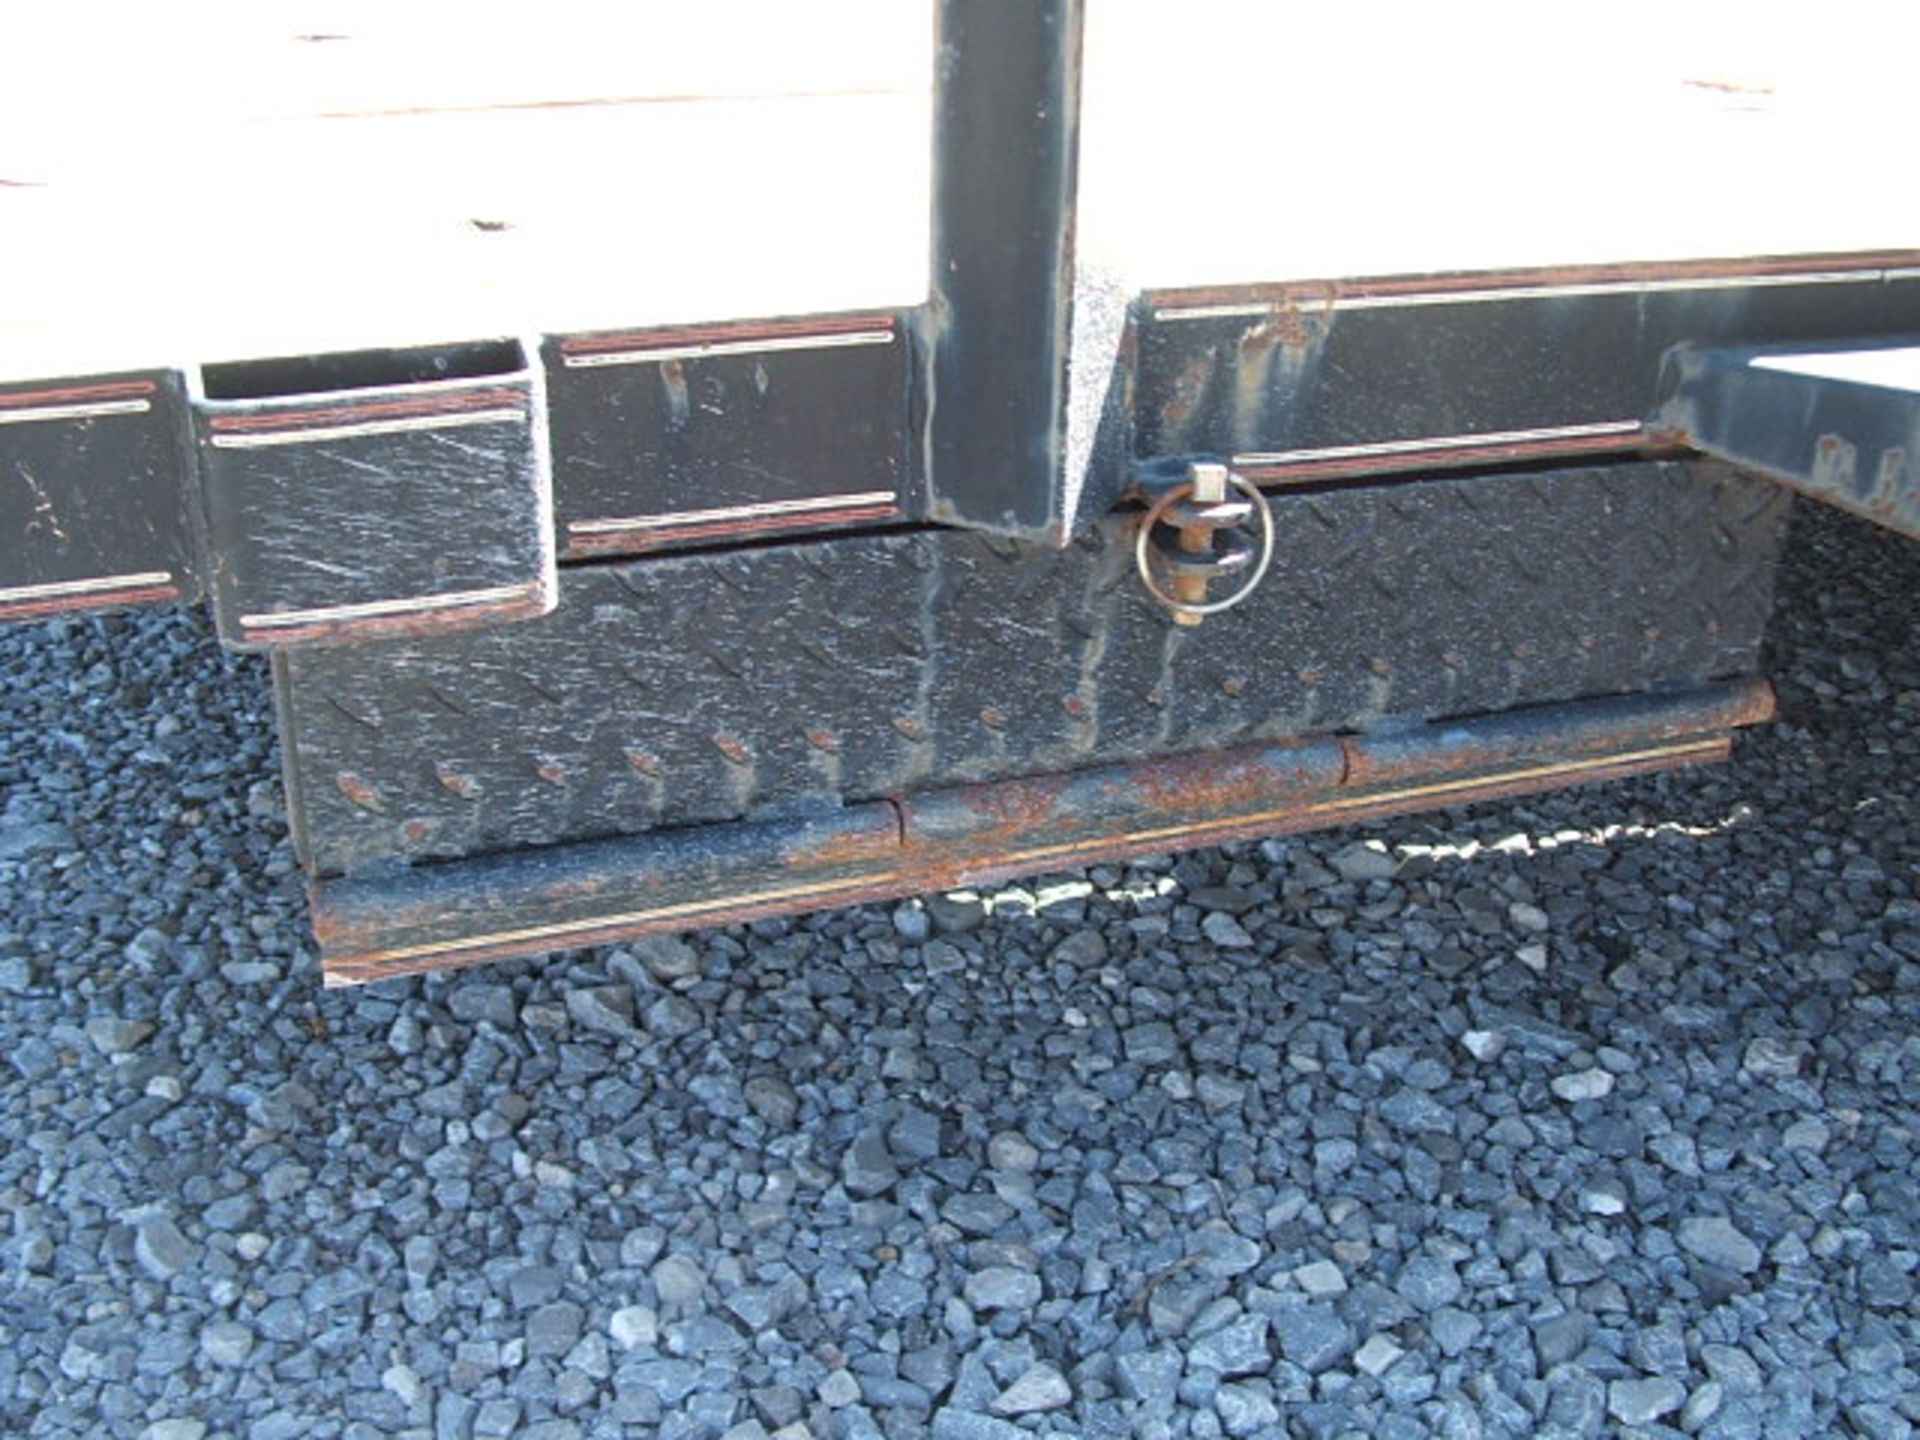 Lot 903 16' Bumper Pull Trailer w/Loading Ramps - Image 5 of 5